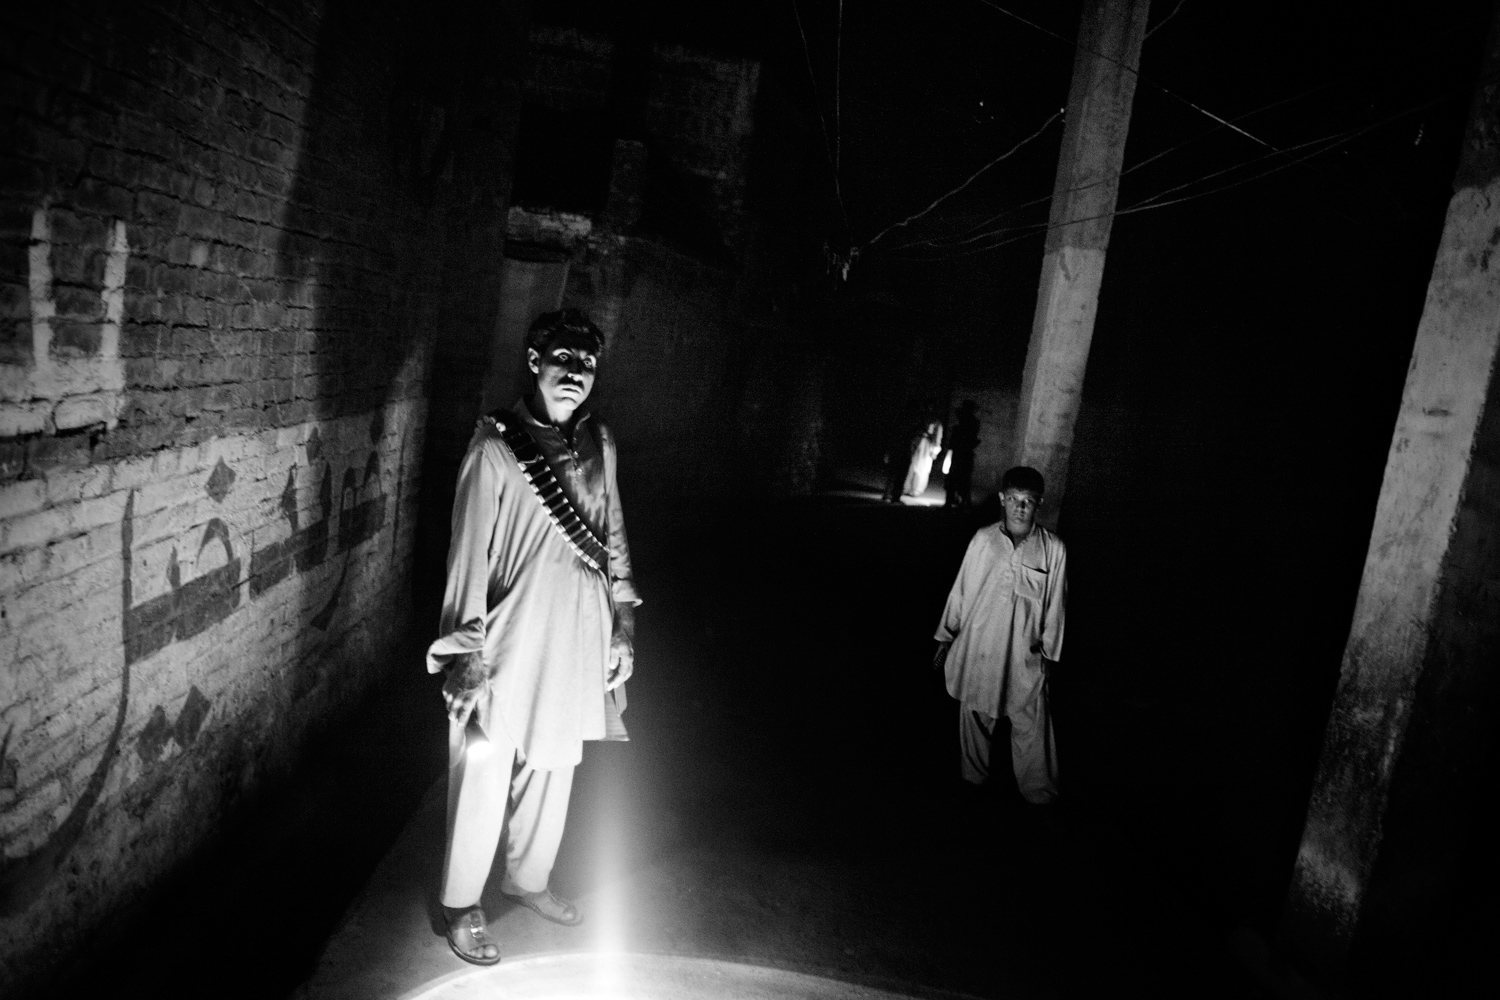 Pakistan, Swat Valley, Bara Bandai, November 2010. Lashkar members, under the leadership of Idrees Lala, performing pehra on the streets of the village. A young member is patrolling with the adults.